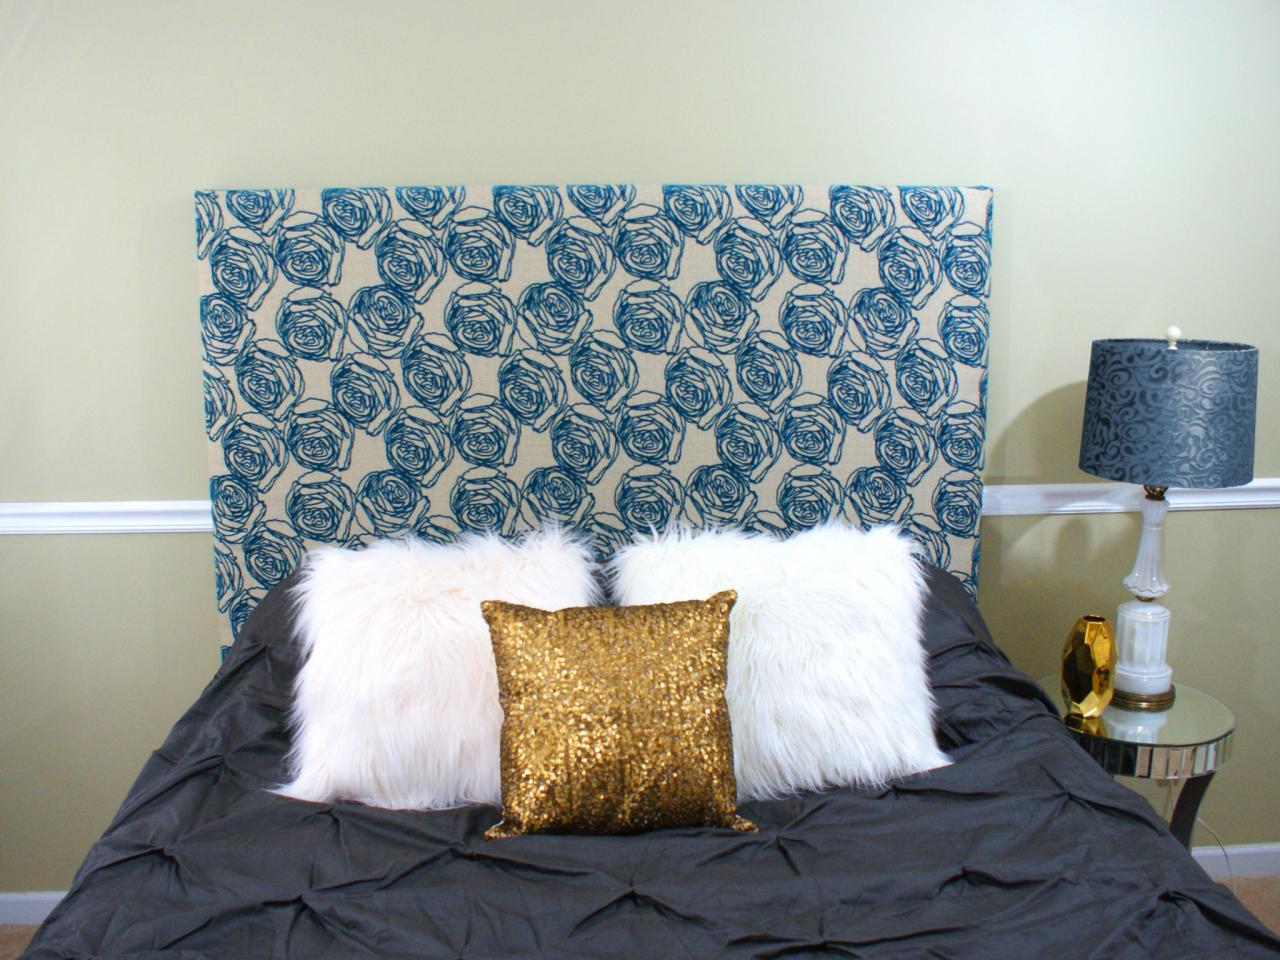 How To Upholster A Headboard For, Building A Headboard For King Size Bed